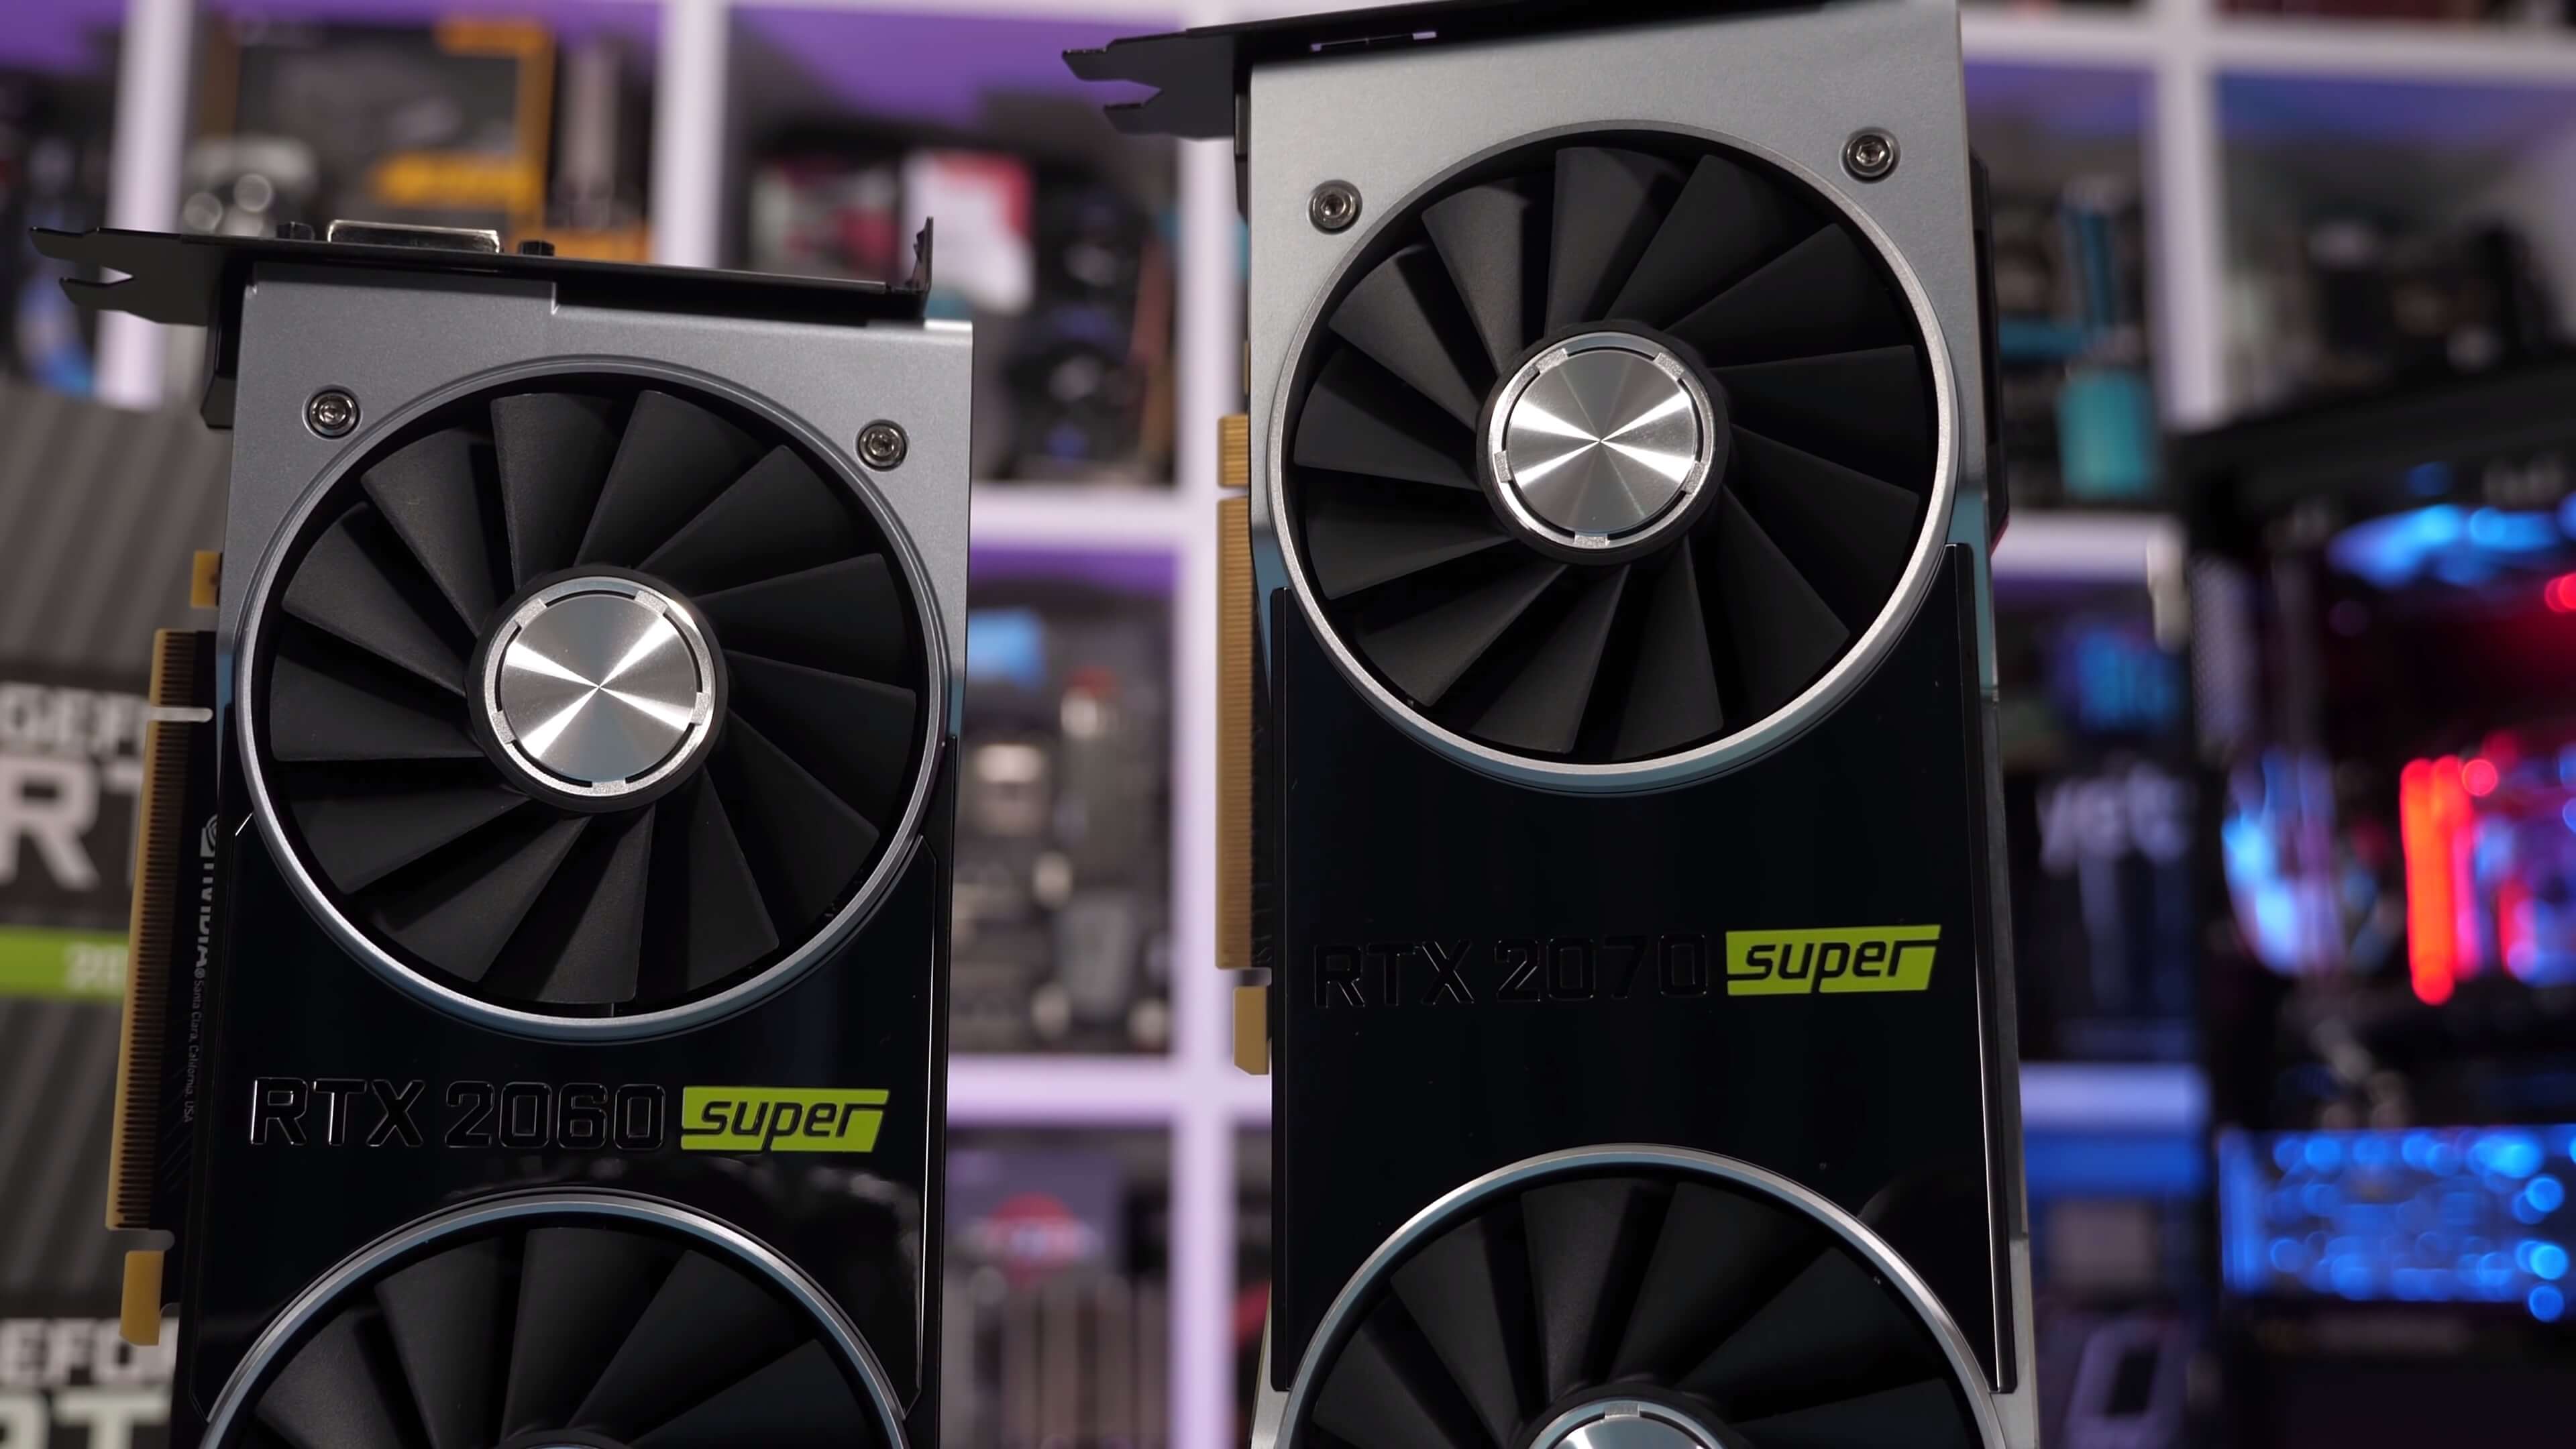 Nvidia GeForce 2070 Super and RTX 2060 Super Review |